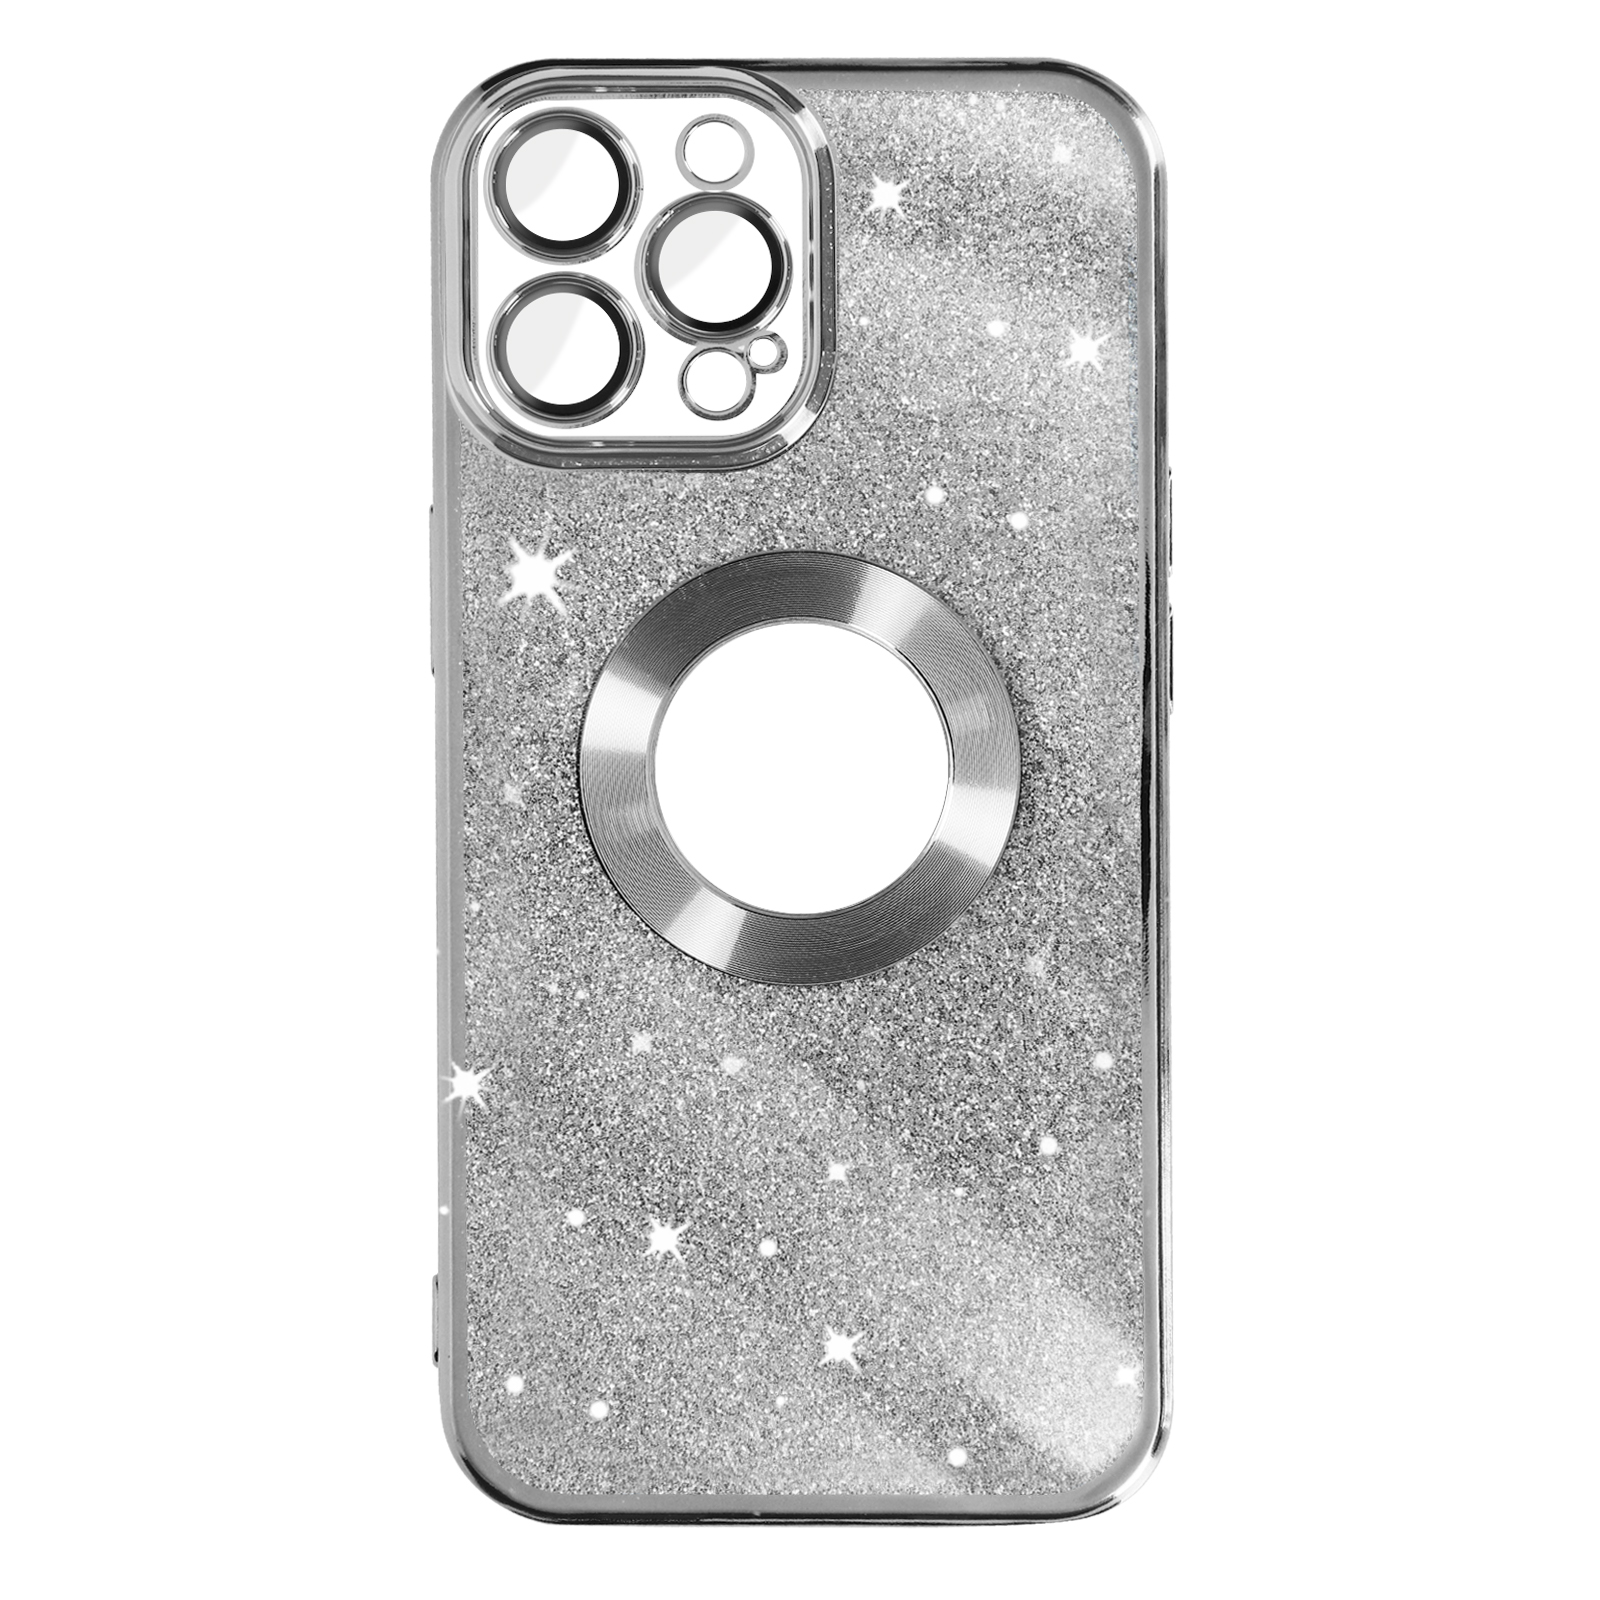 Silber Spark Protecam Series, 12 AVIZAR Backcover, iPhone Max, Apple, Pro